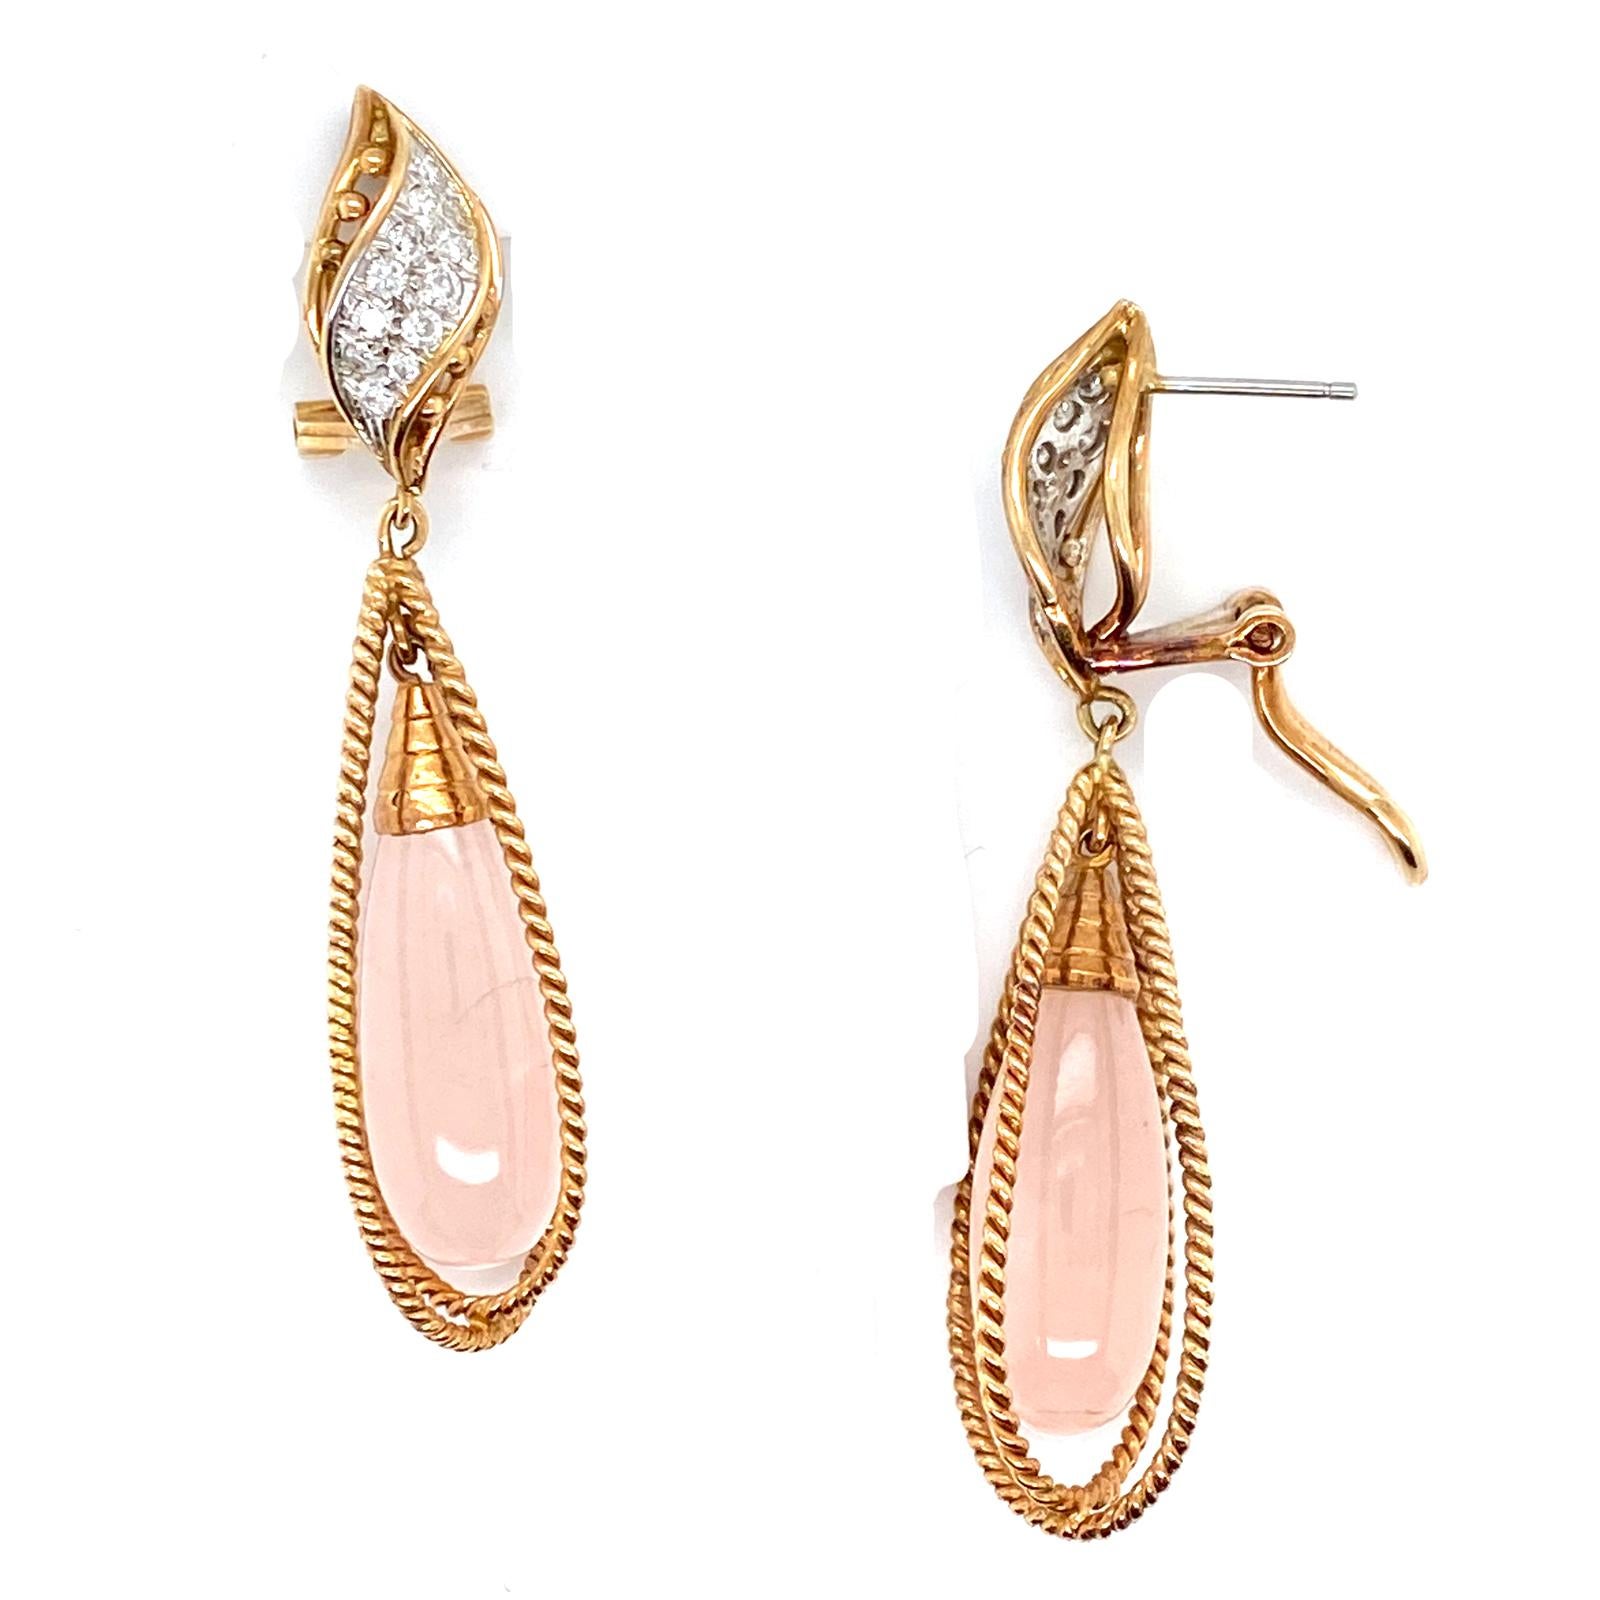 Beautiful pink quartz diamond drop earrings fashioned in 14 karat yellow gold. The 24 round brilliant cut diamonds weigh .50 carat total weight and are graded G-H color and SI clarity. The rose quartz drops are caged between textured/twisted yellow